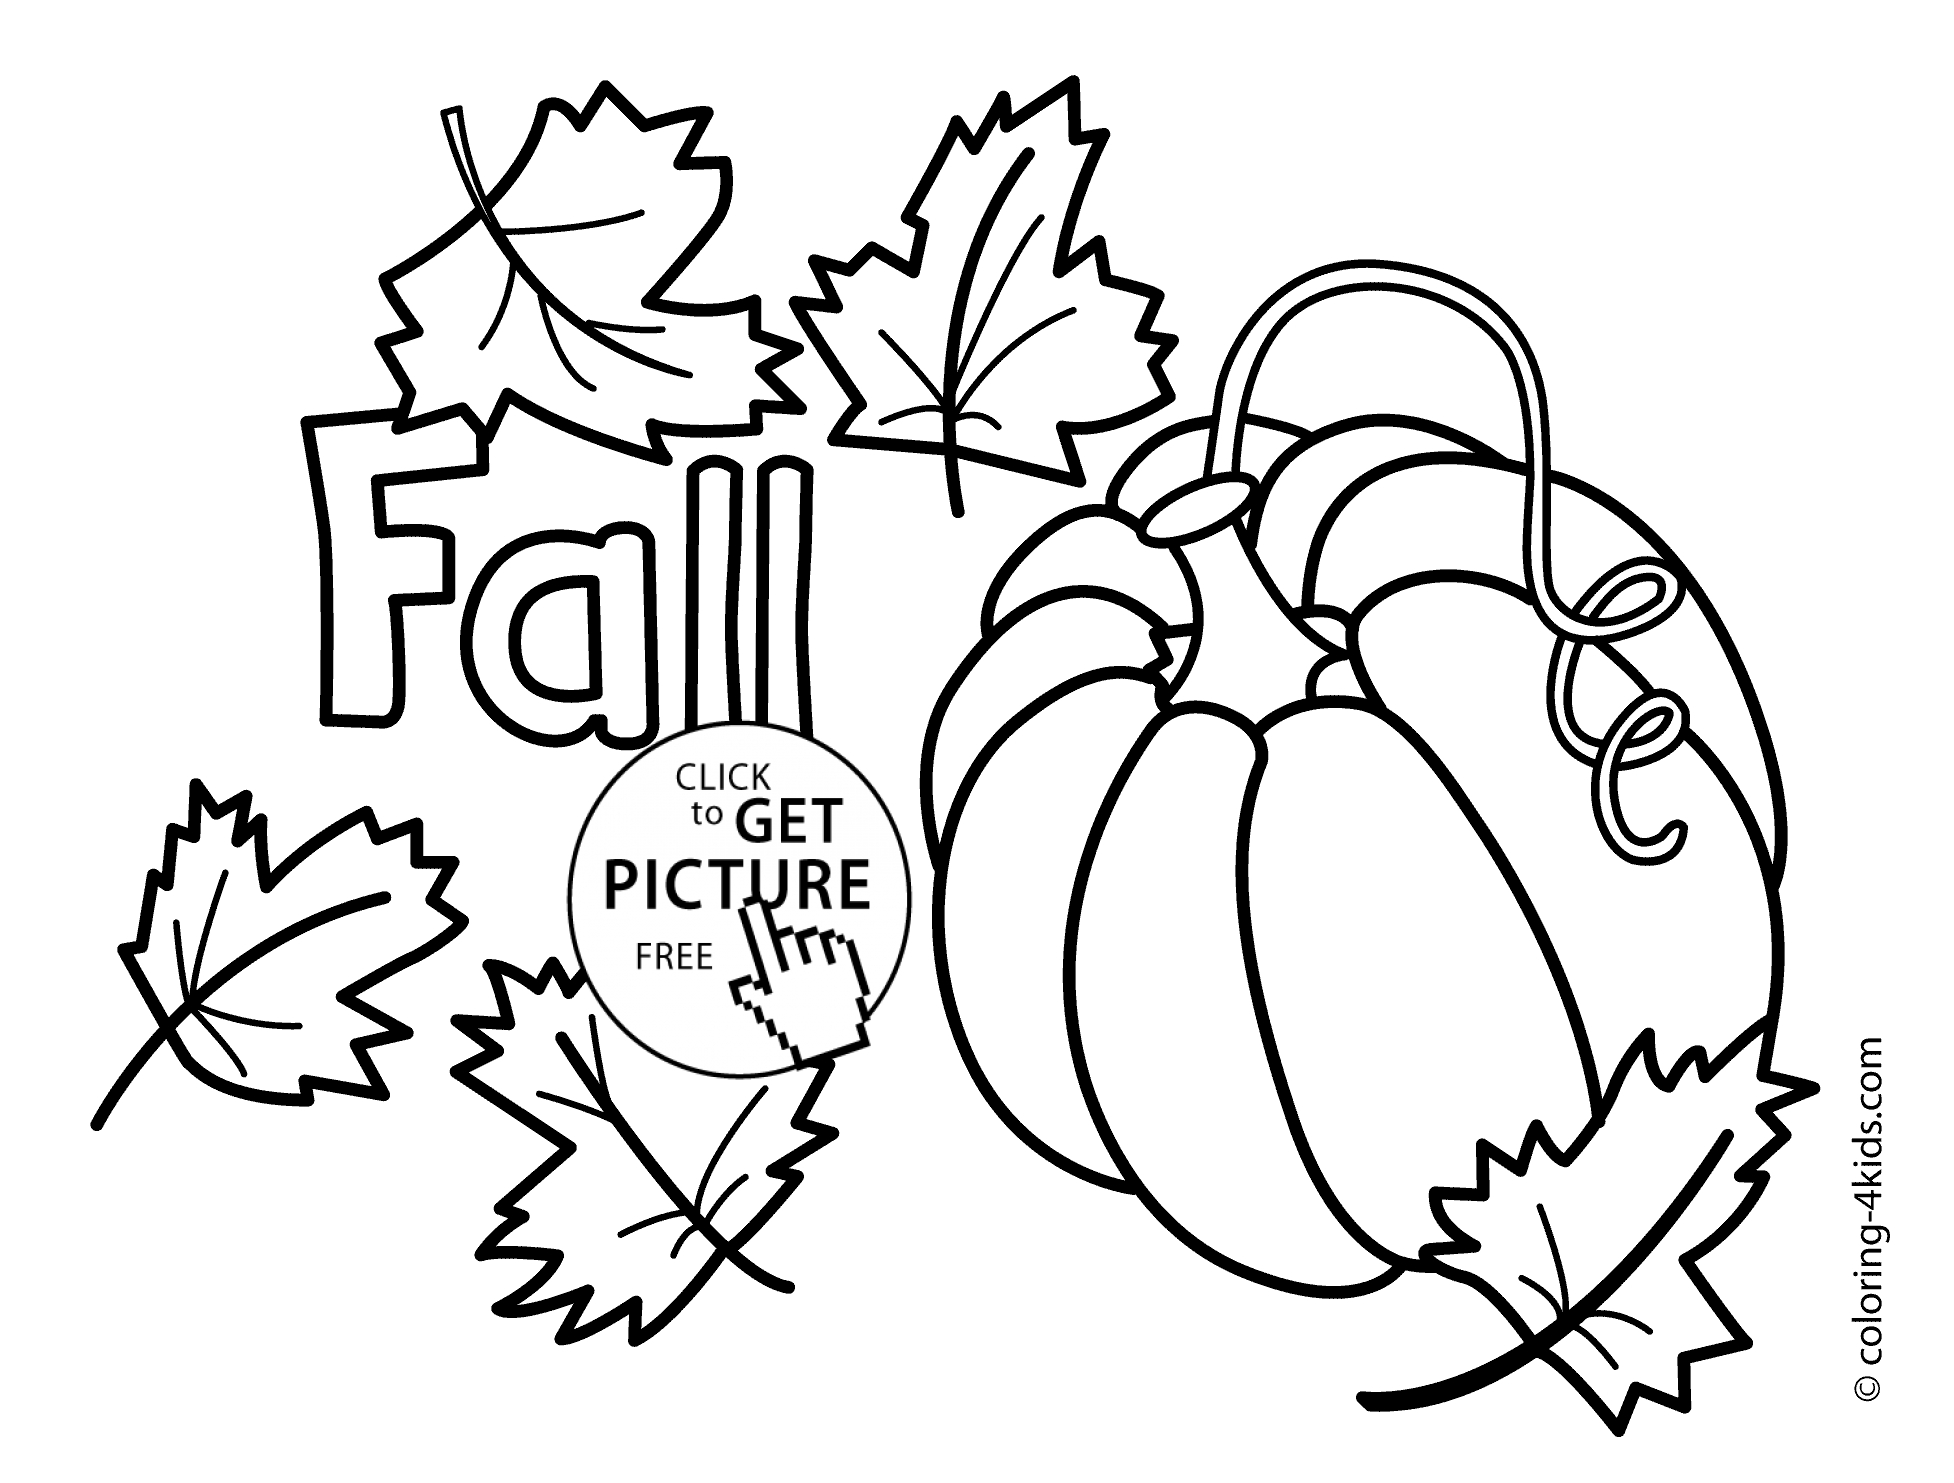 Fall Coloring Pages Free Coloring Pages Disney Princess Coloring Sheets Printableee For